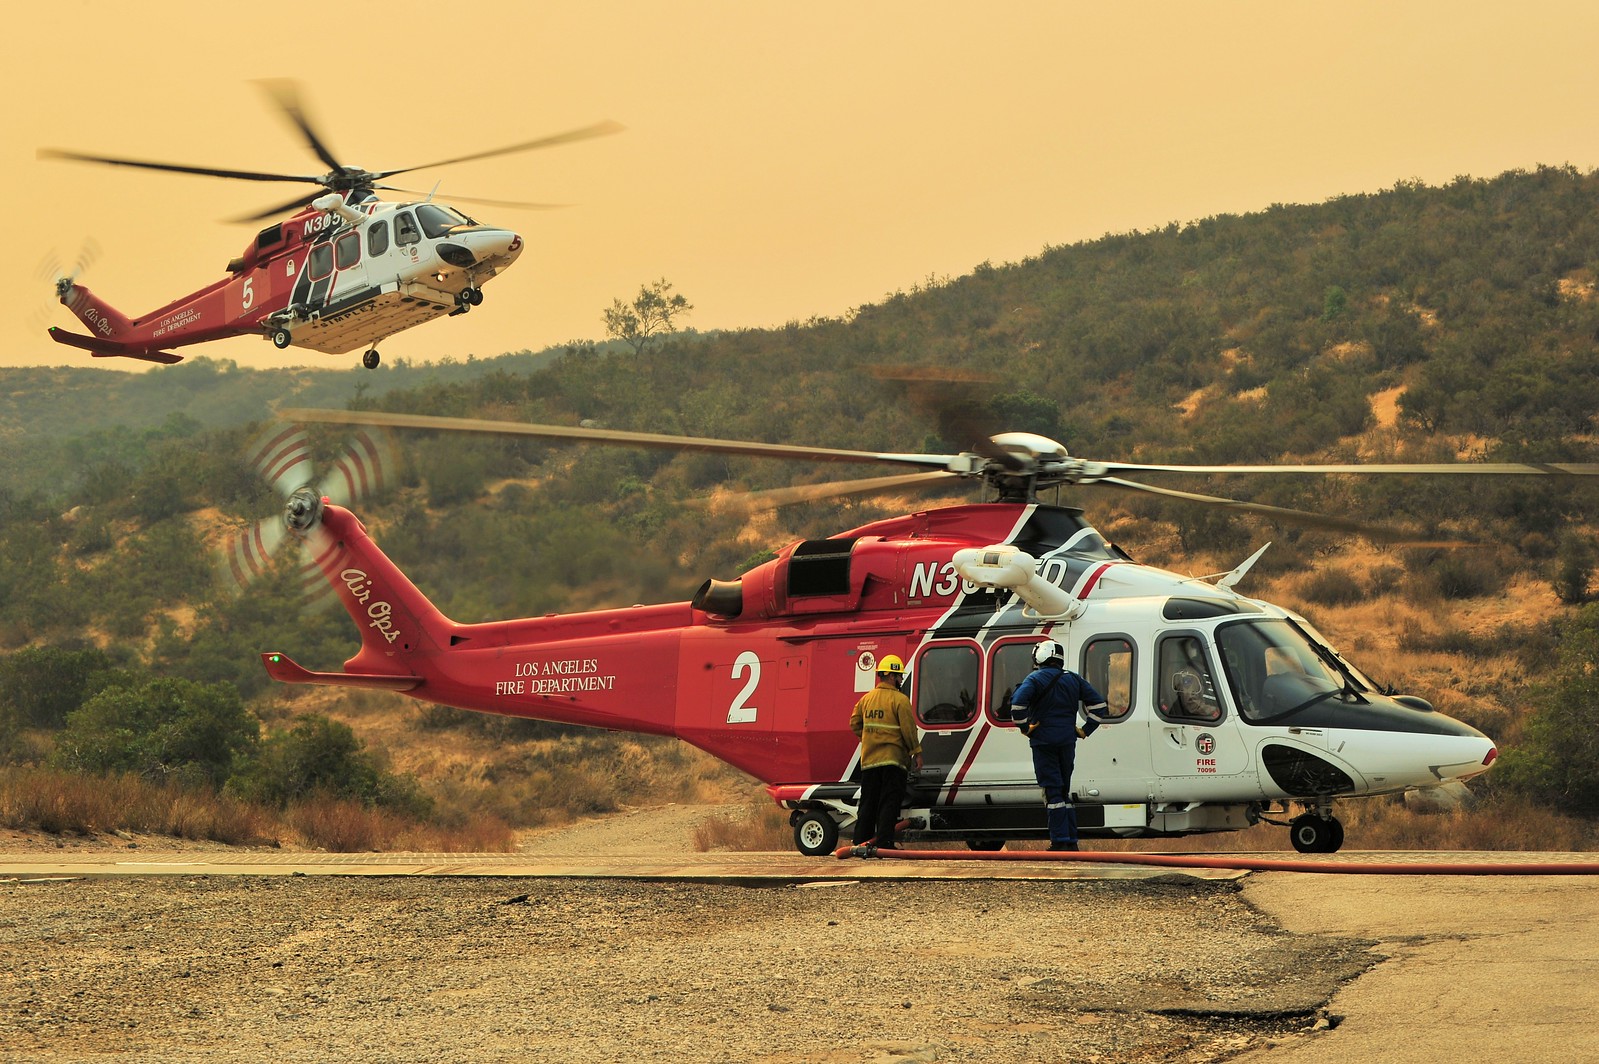 The AW139 aircraft is expected to be delivered from Leonardo's Philadelphia facility in spring 2019. Leonardo Photo